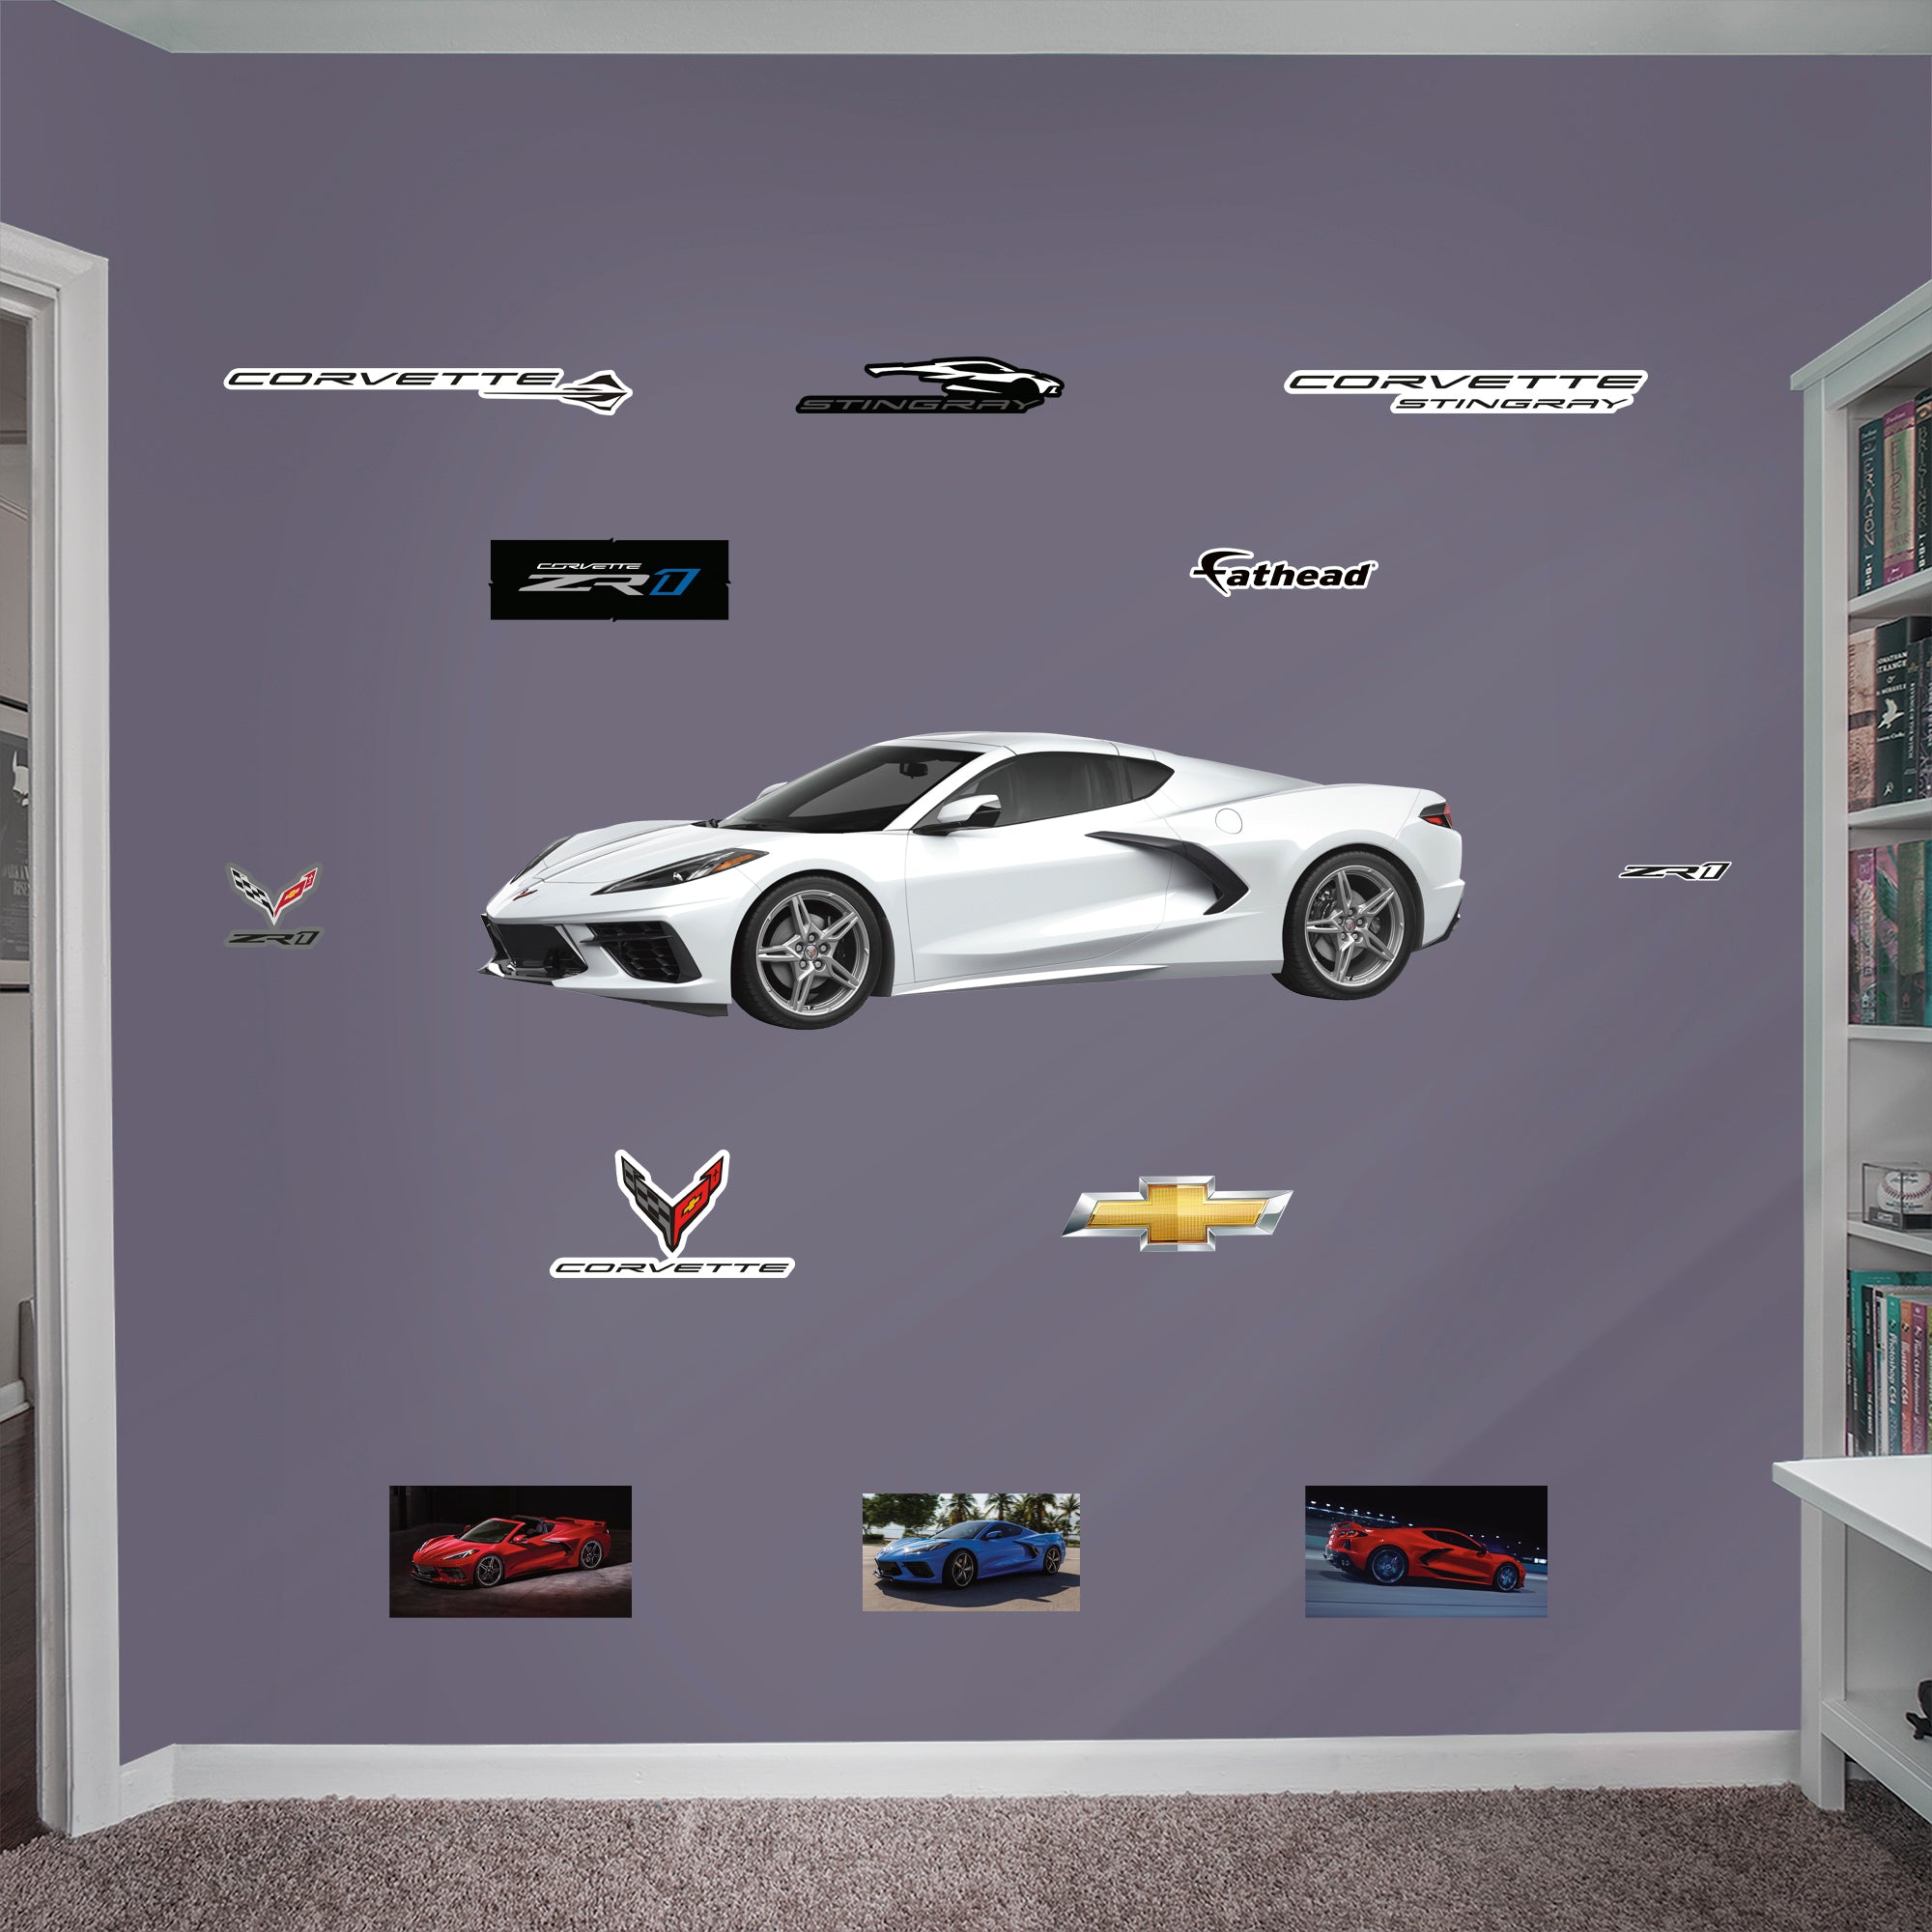 Chevrolet Corvette White Stingray: Officially Licensed GM Removable Wall Decal Life-Size + 12 Decals by Fathead | Vinyl